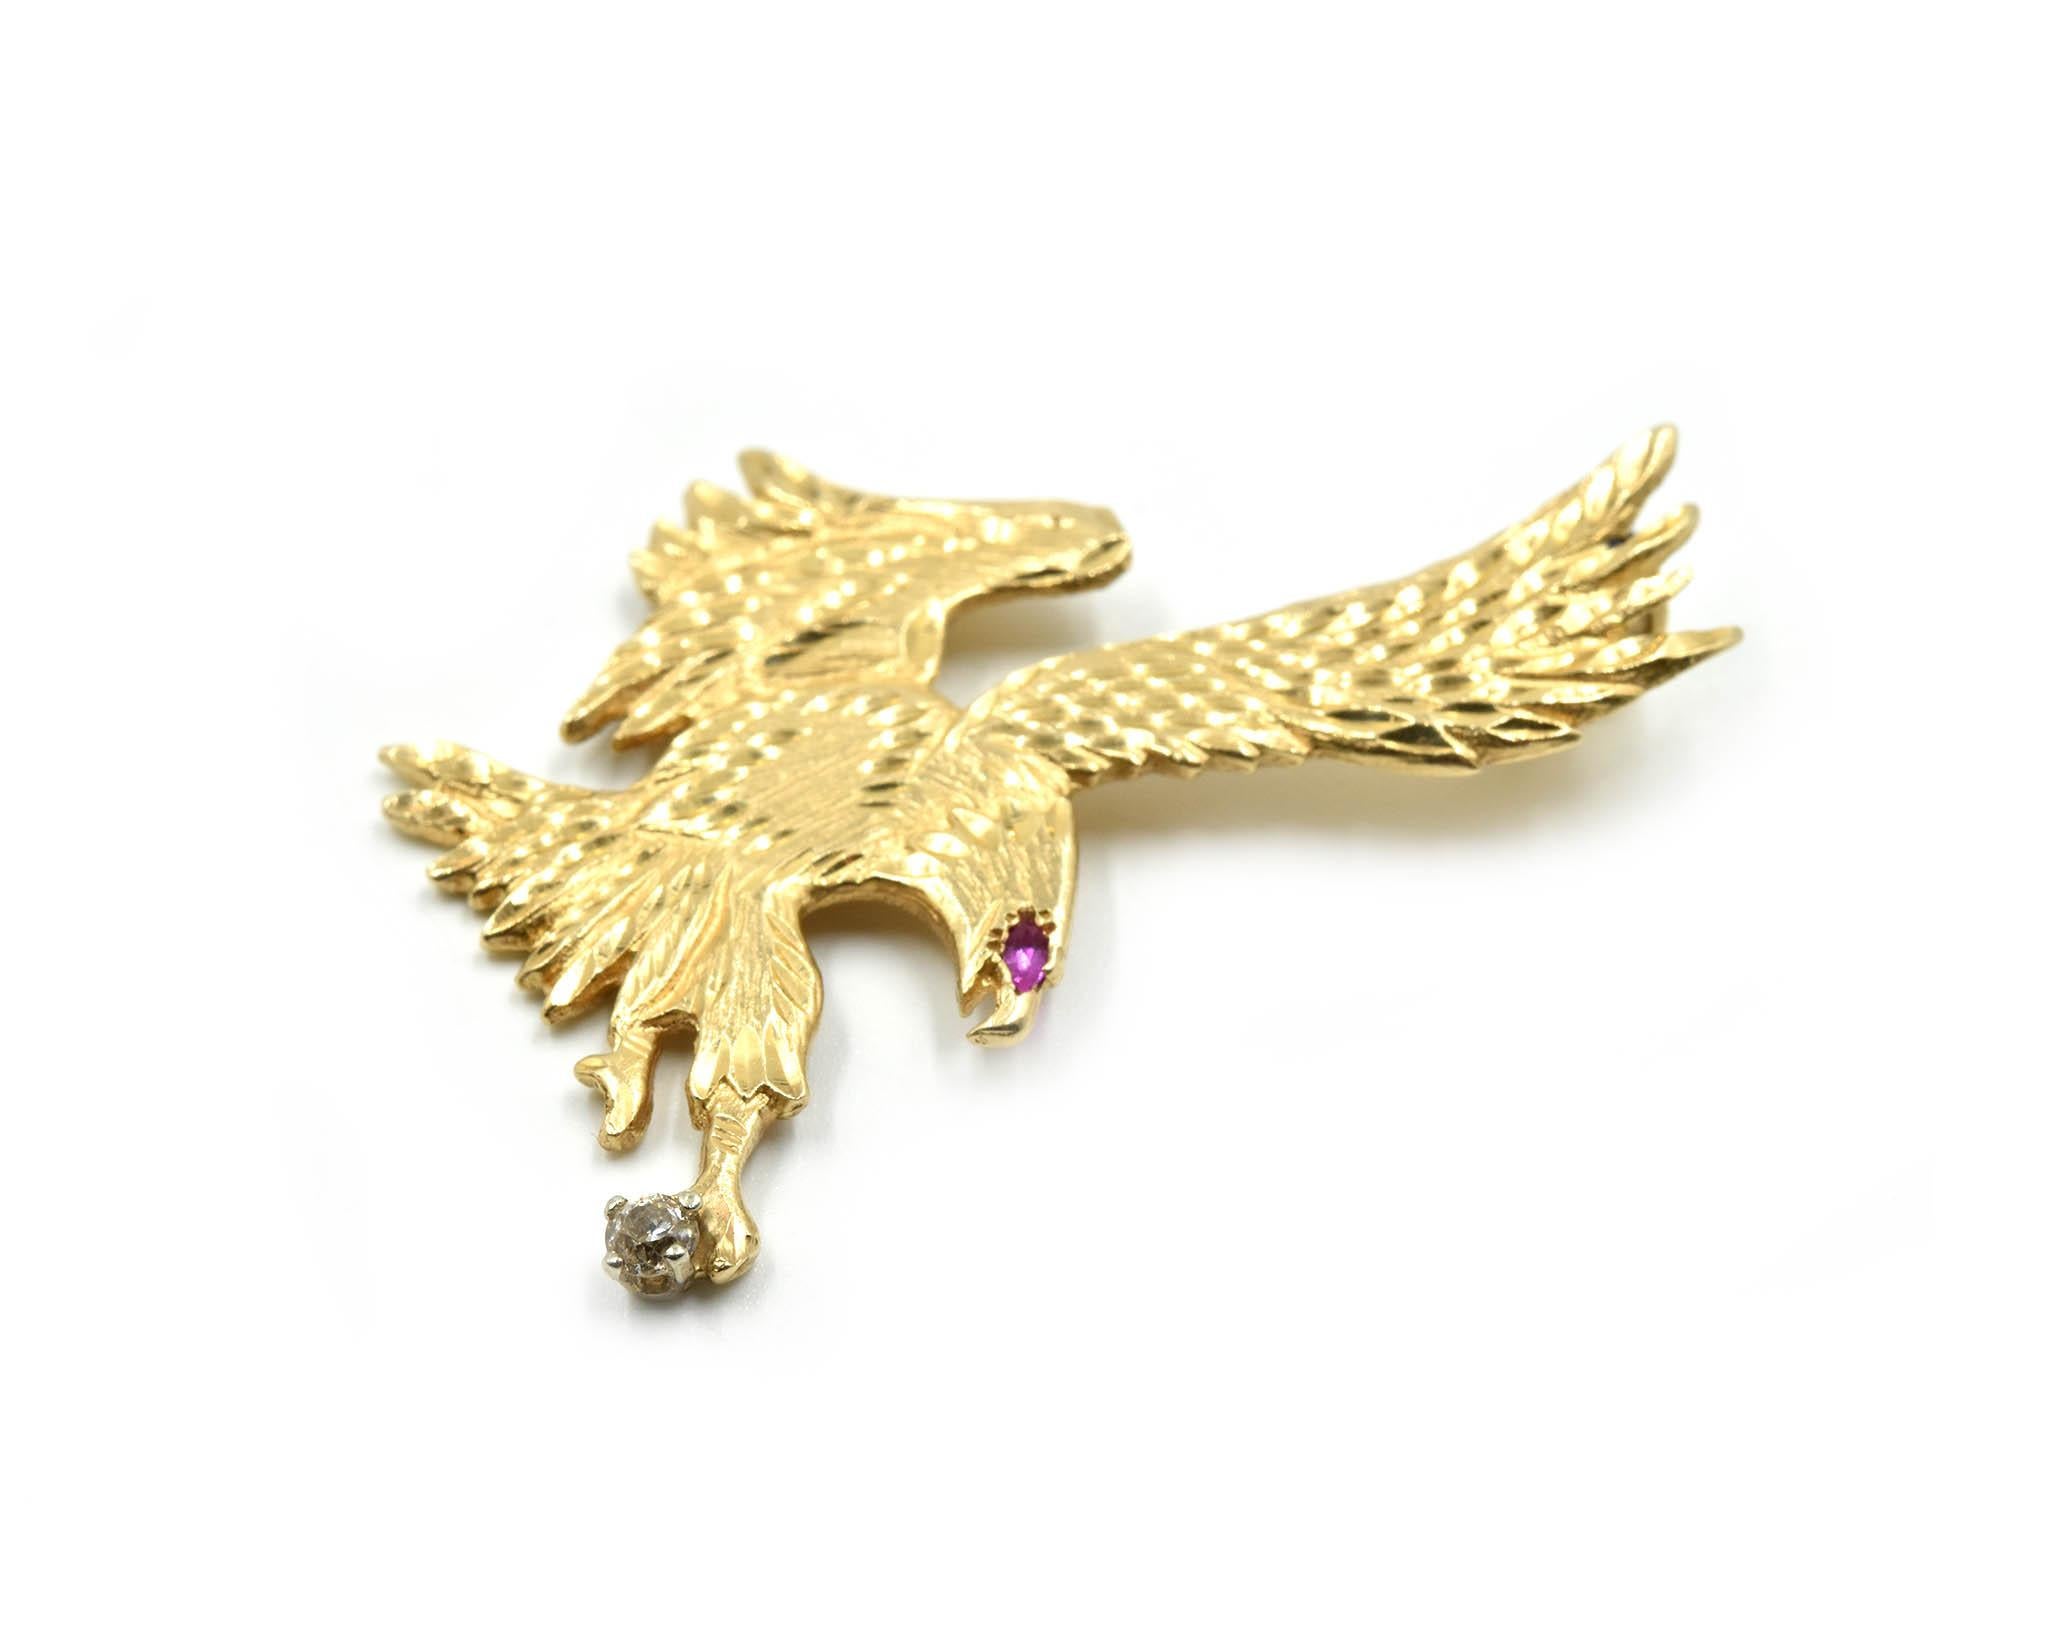 Designer: custom design
Material: 14k yellow gold
Dimensions: eagle pendant measures 2-inches long and 1 1/2-inches wide
Weight: 11.42 grams
